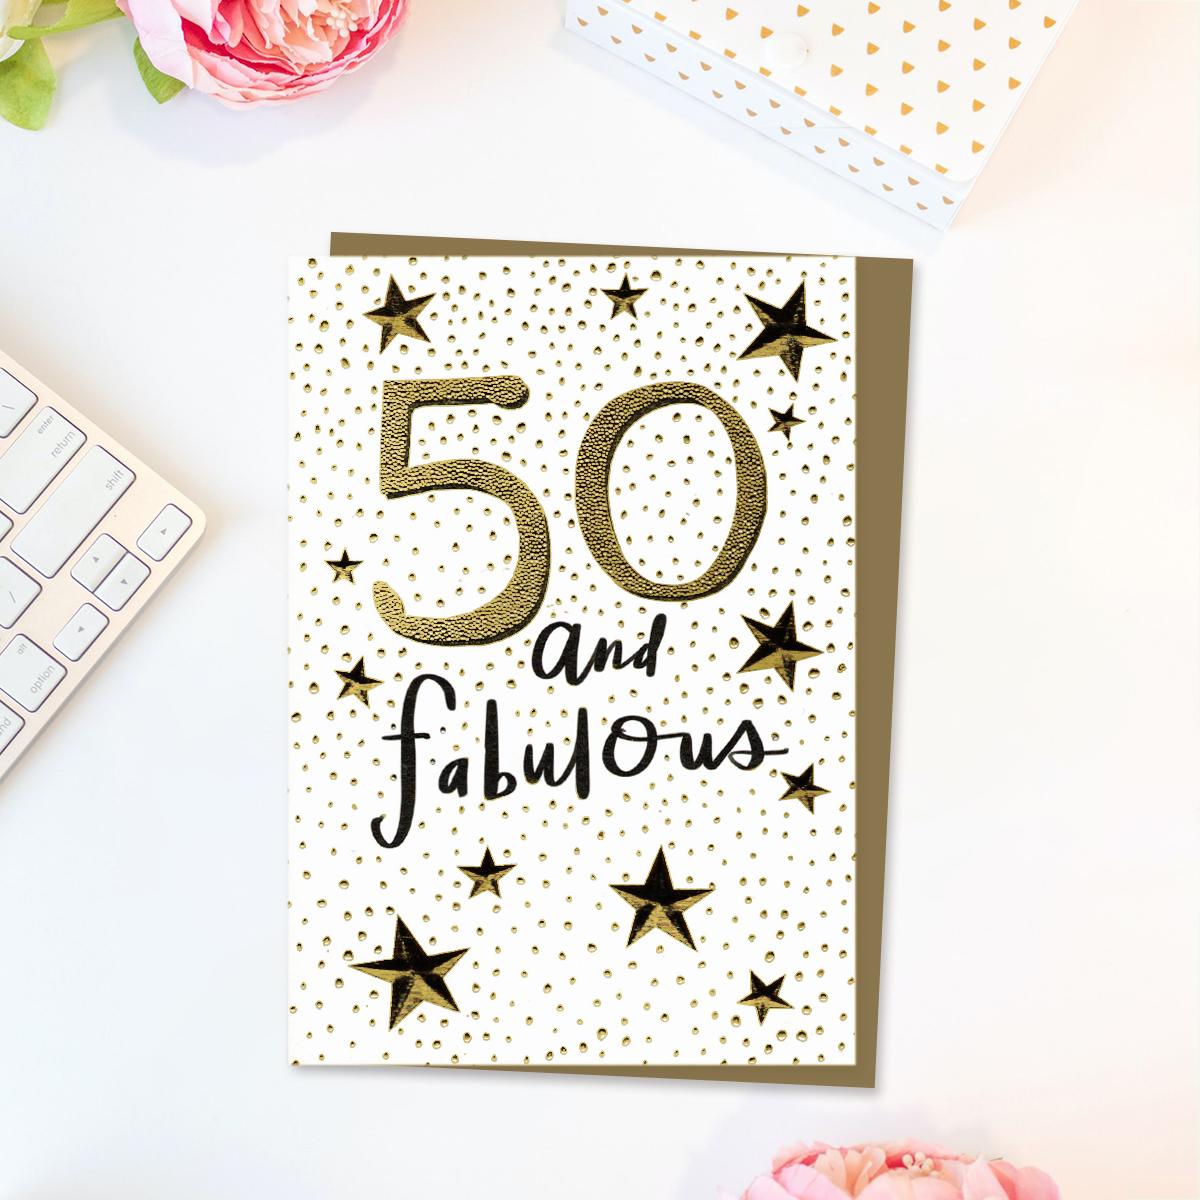 50 And Fabulous Card Front Image